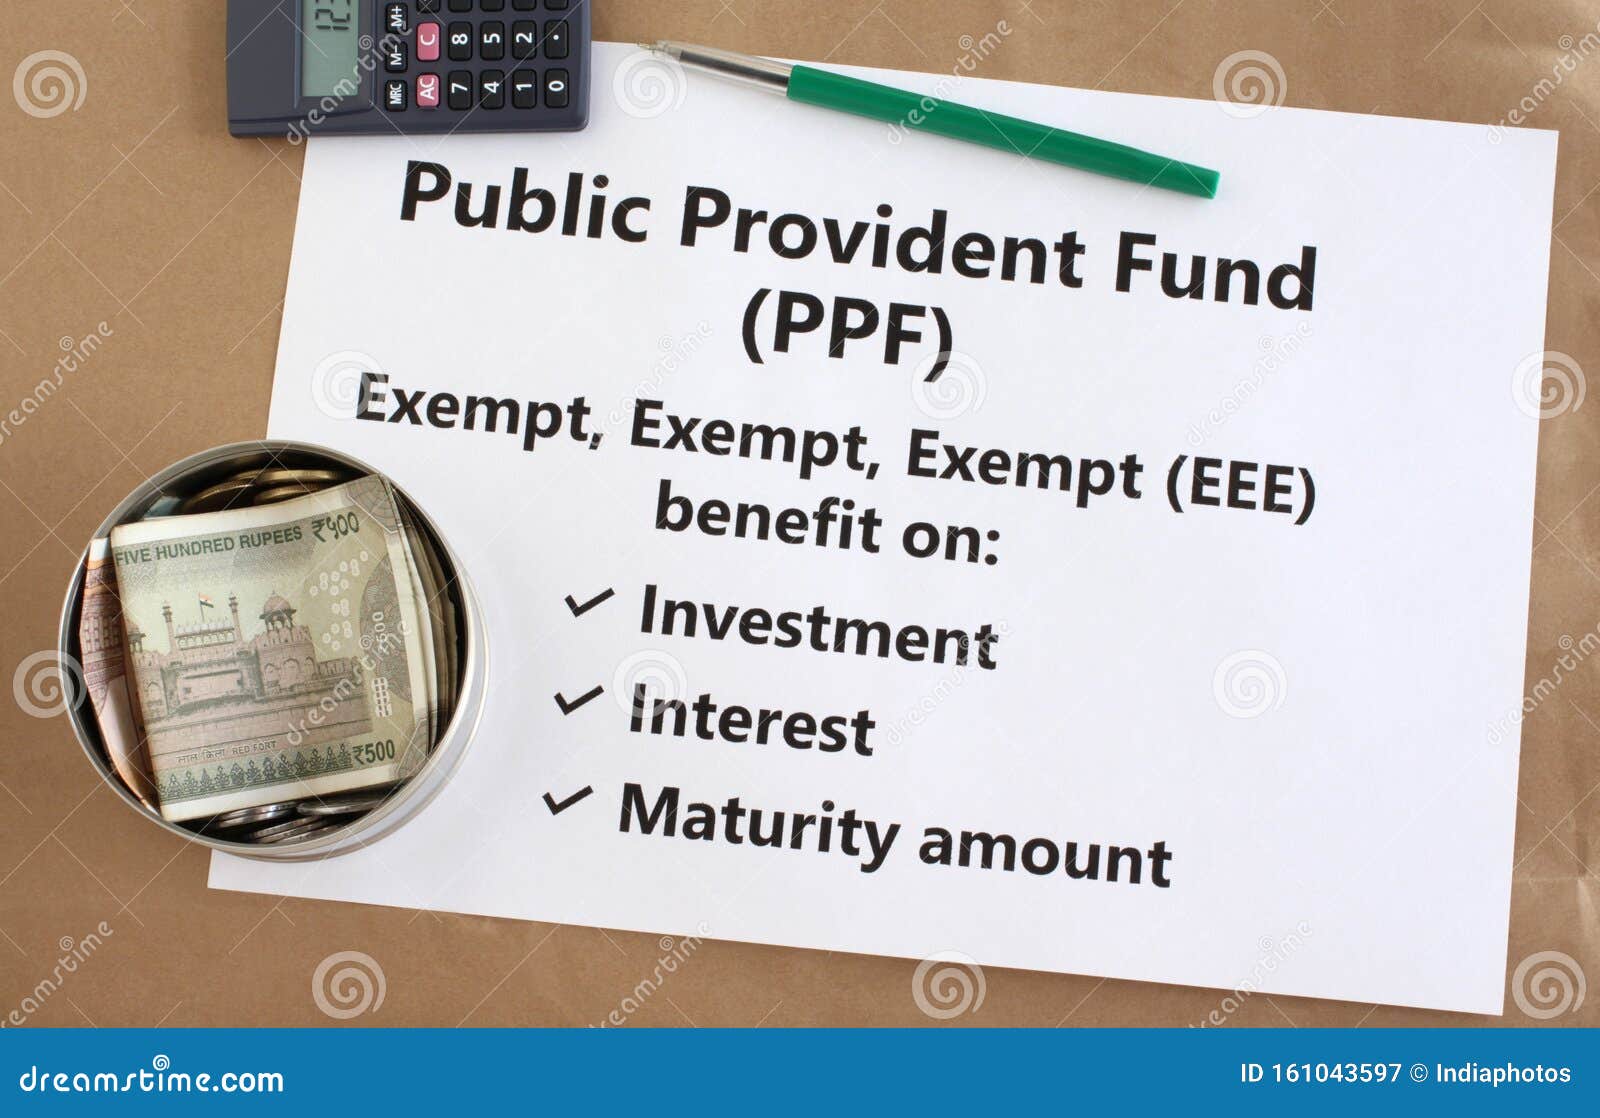 public provident fund ppf low risk indian investment with triple tax exempt benefit